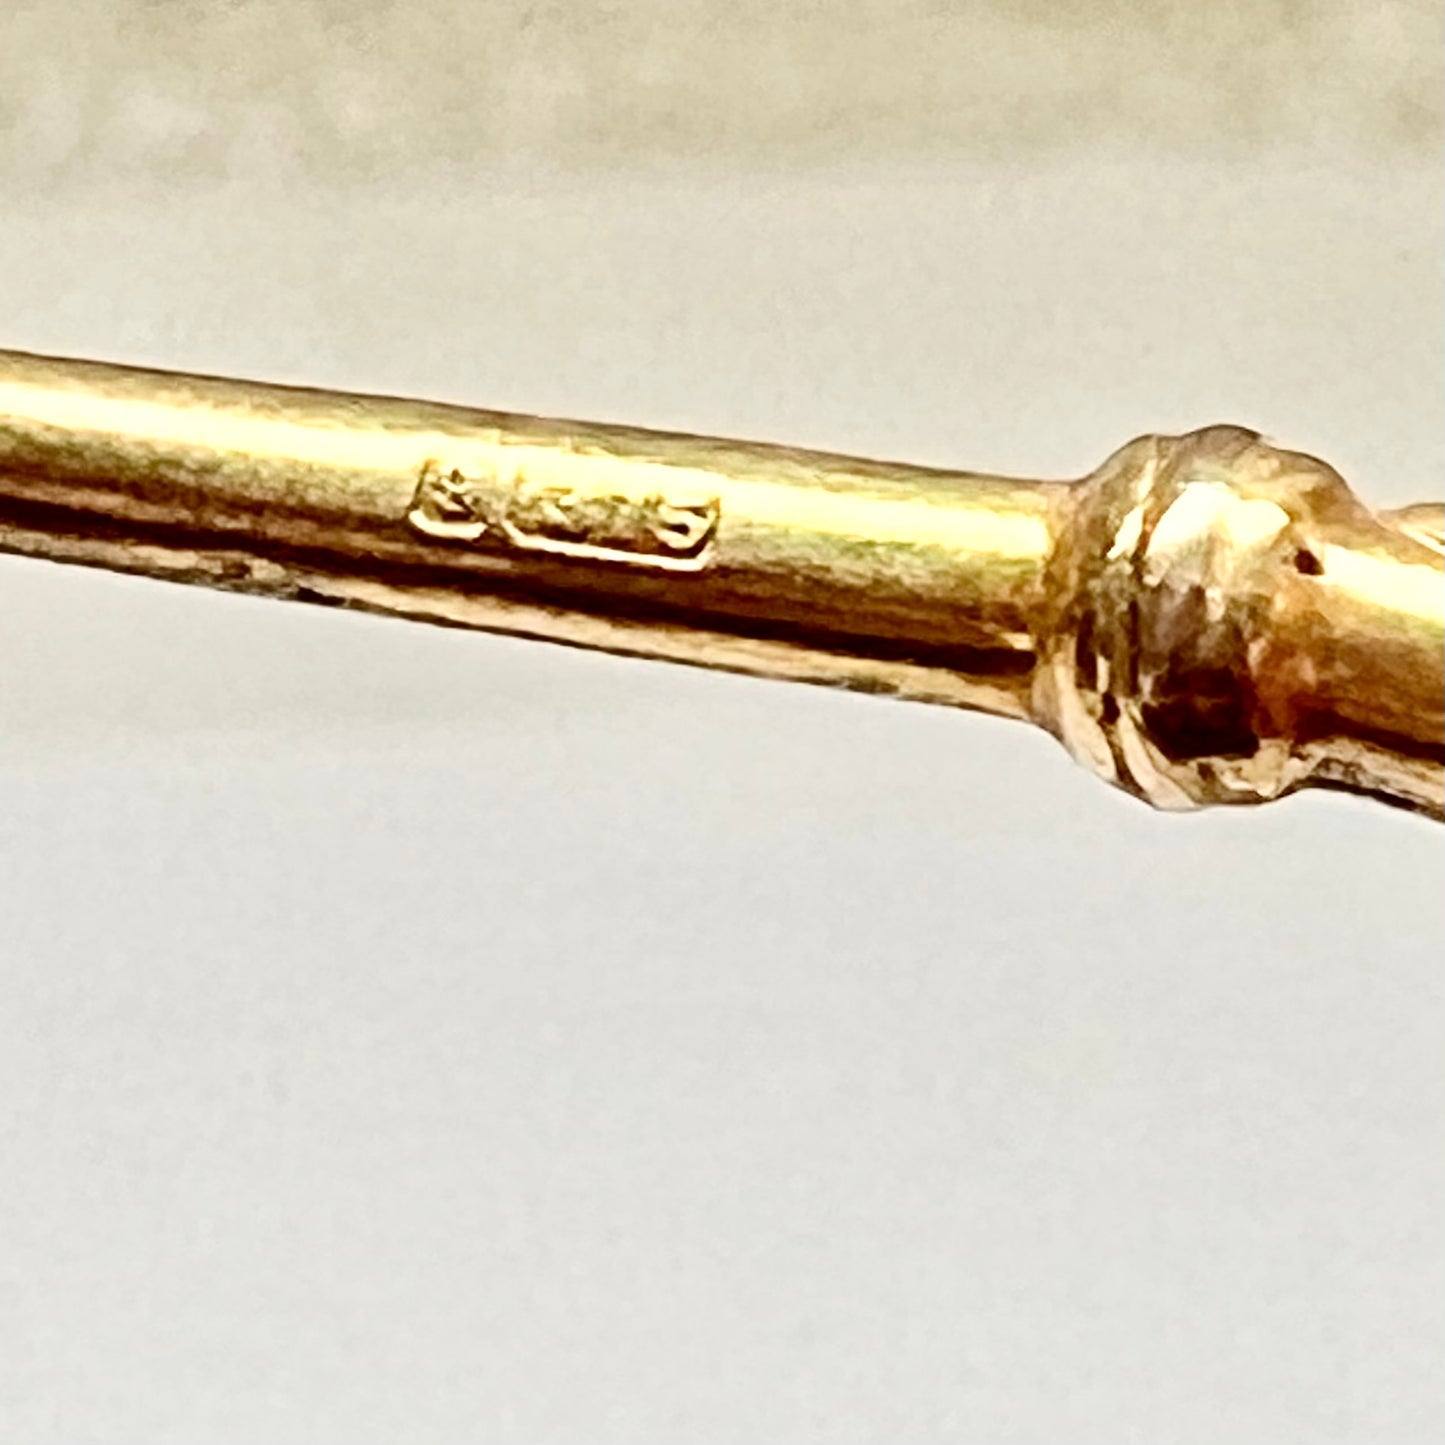 Edwardian 9ct gold button hook, with marks for Birmingham 1910, Chrisford and Norris